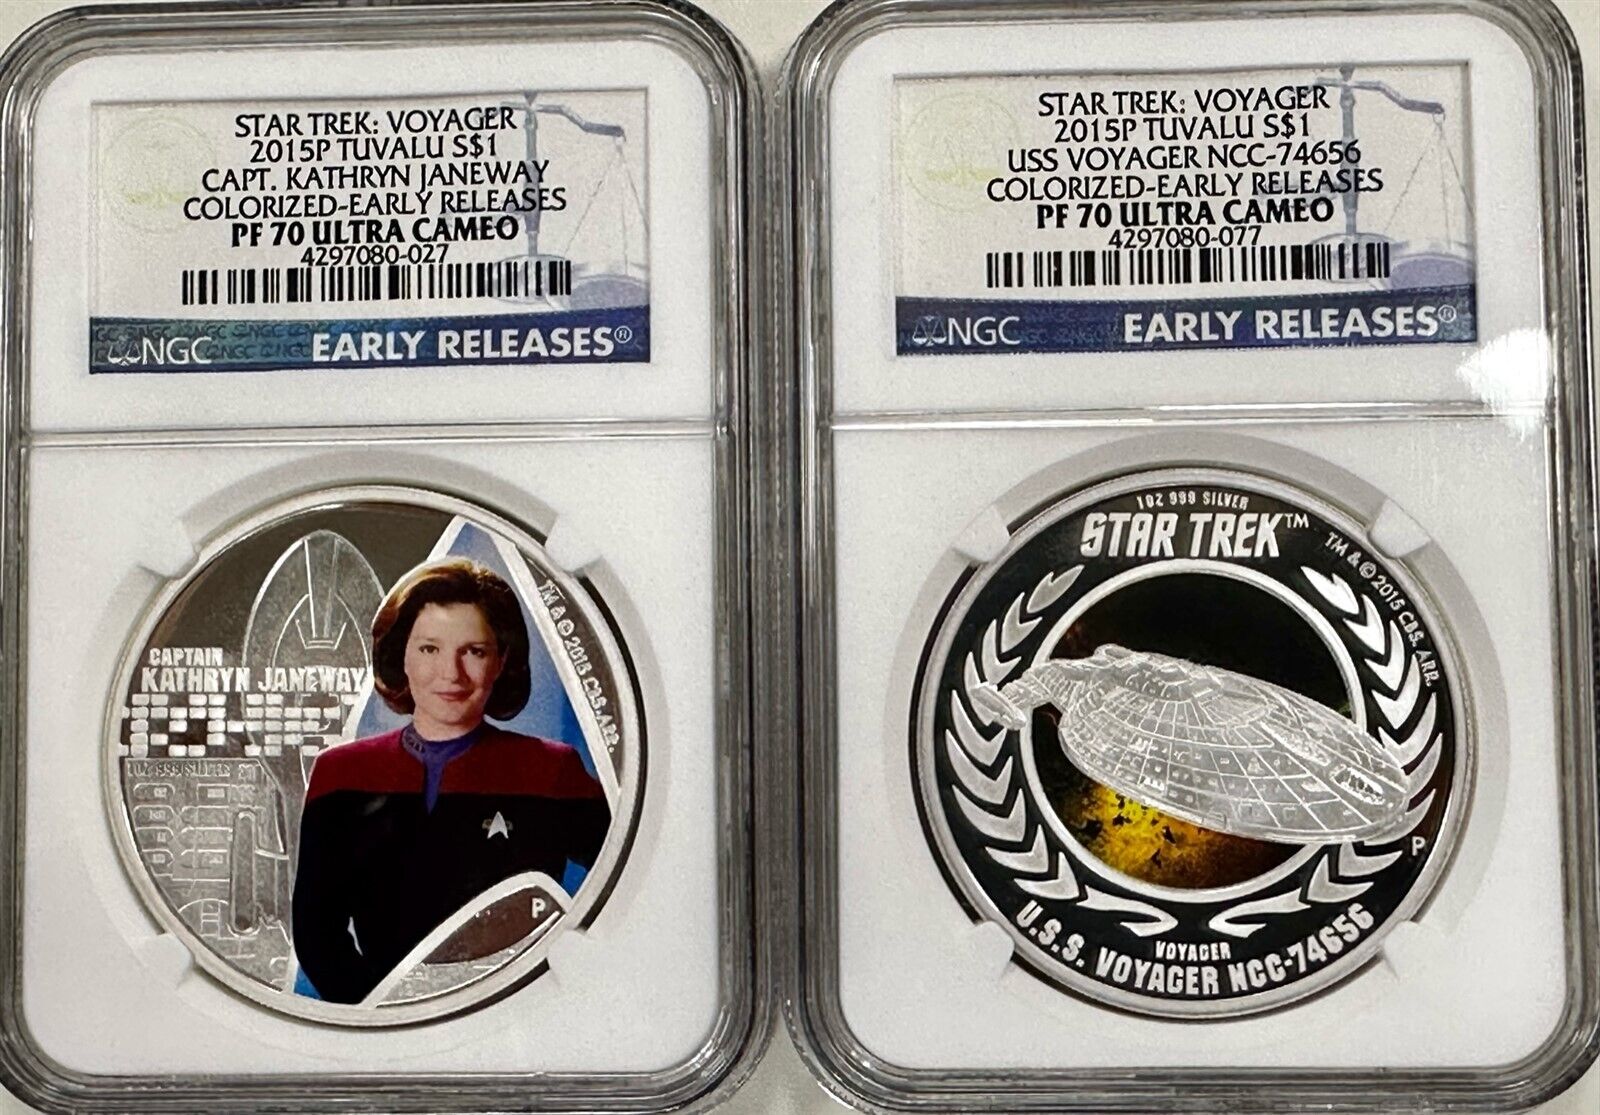 2015 P Tuvalu Star Trek Janeway Voyager Colorized NGC PF70 UC Early .999 Silver